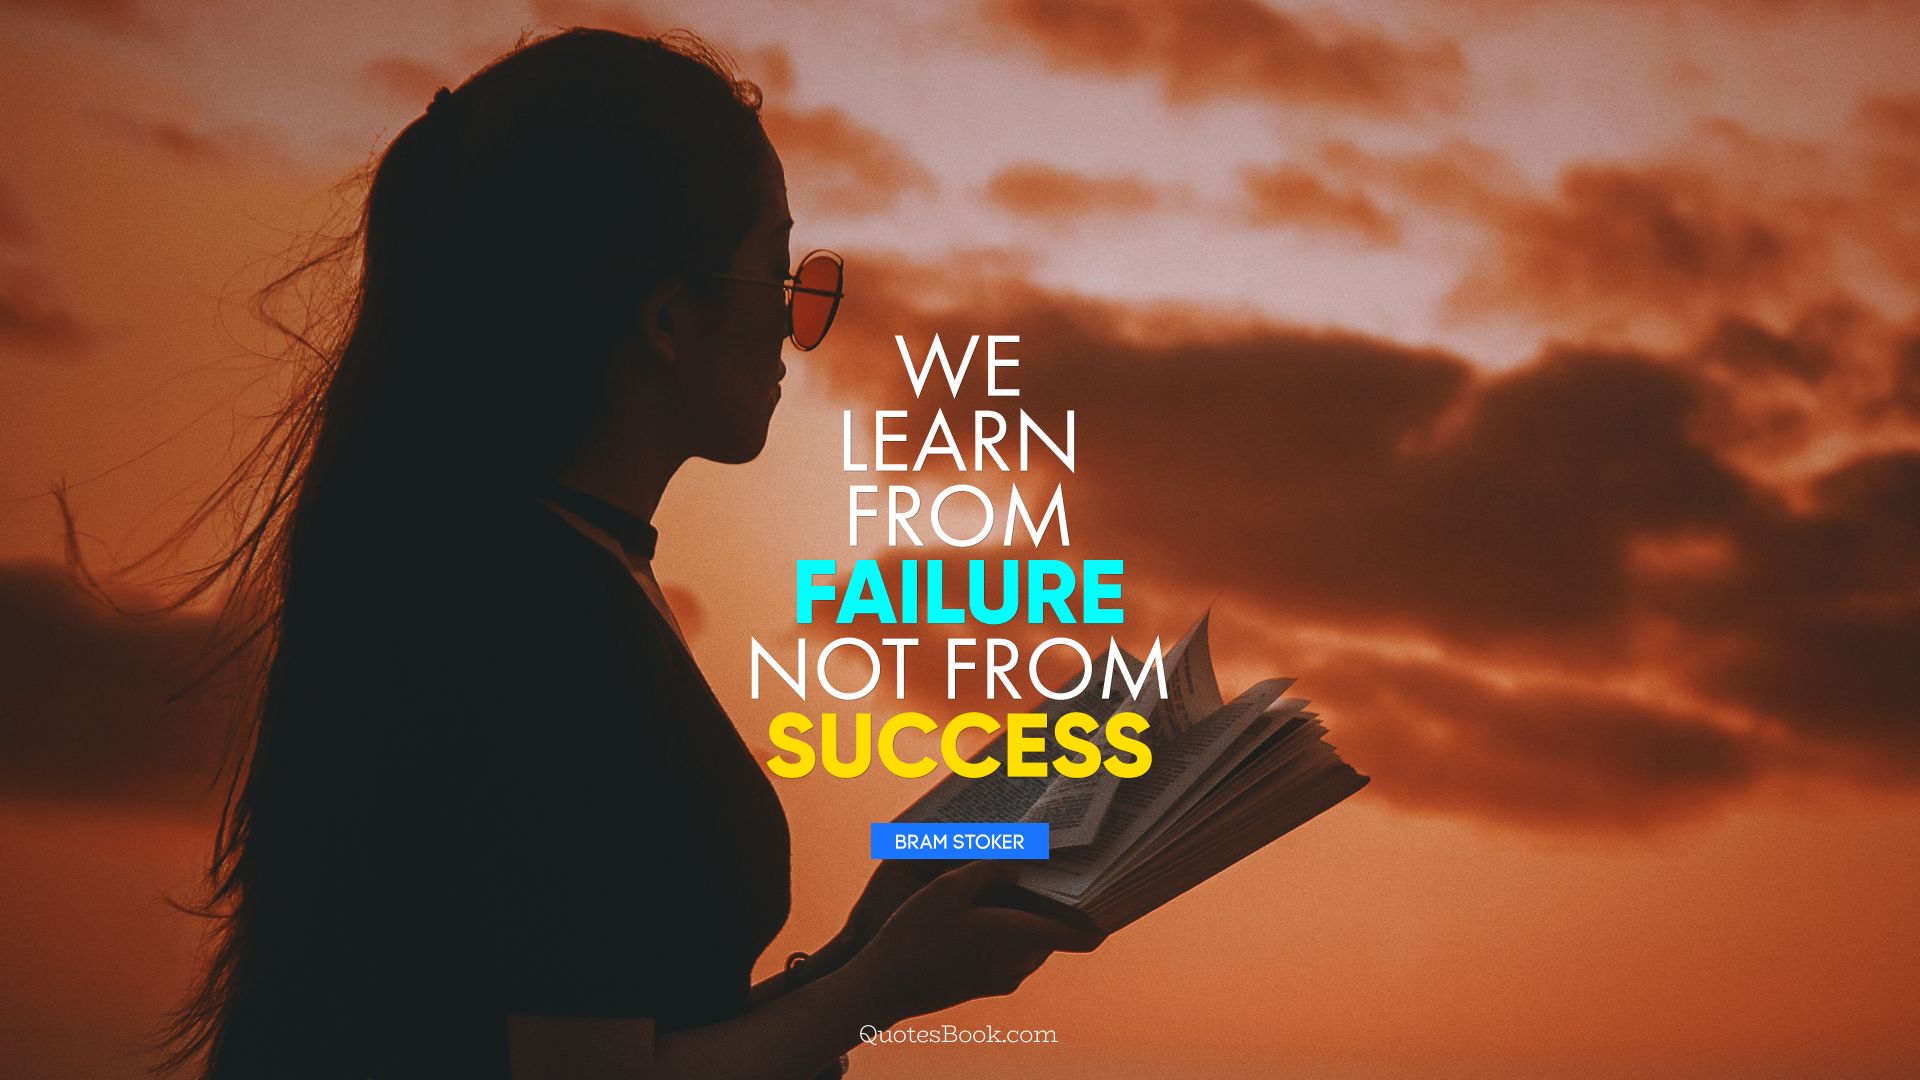 We learn from failure, not from success. - Quote by Bram Stoker